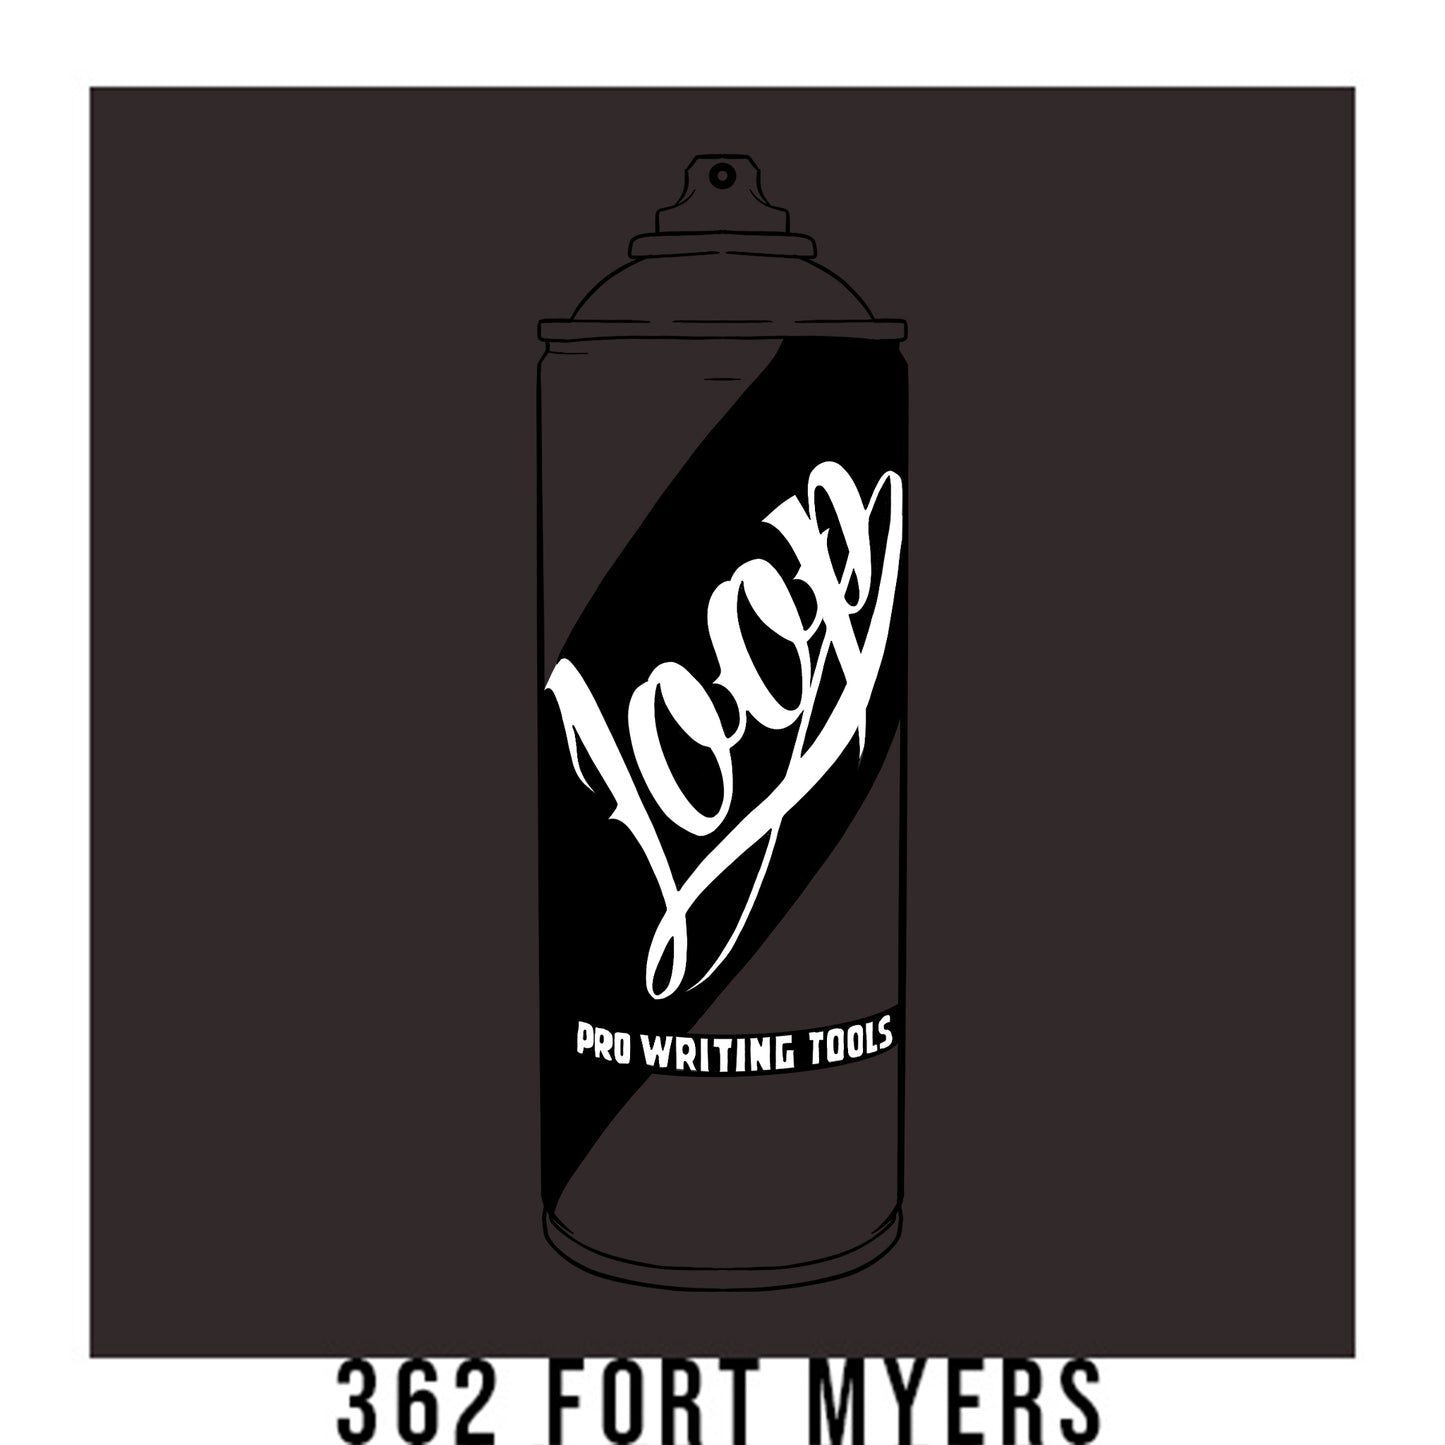 A black outline drawing of a muted purple spray paint can with the word "Loop" written on the face in script. The background is a color swatch of the same muted purple with a white border with the words "362 Fort Myers" at the bottom.